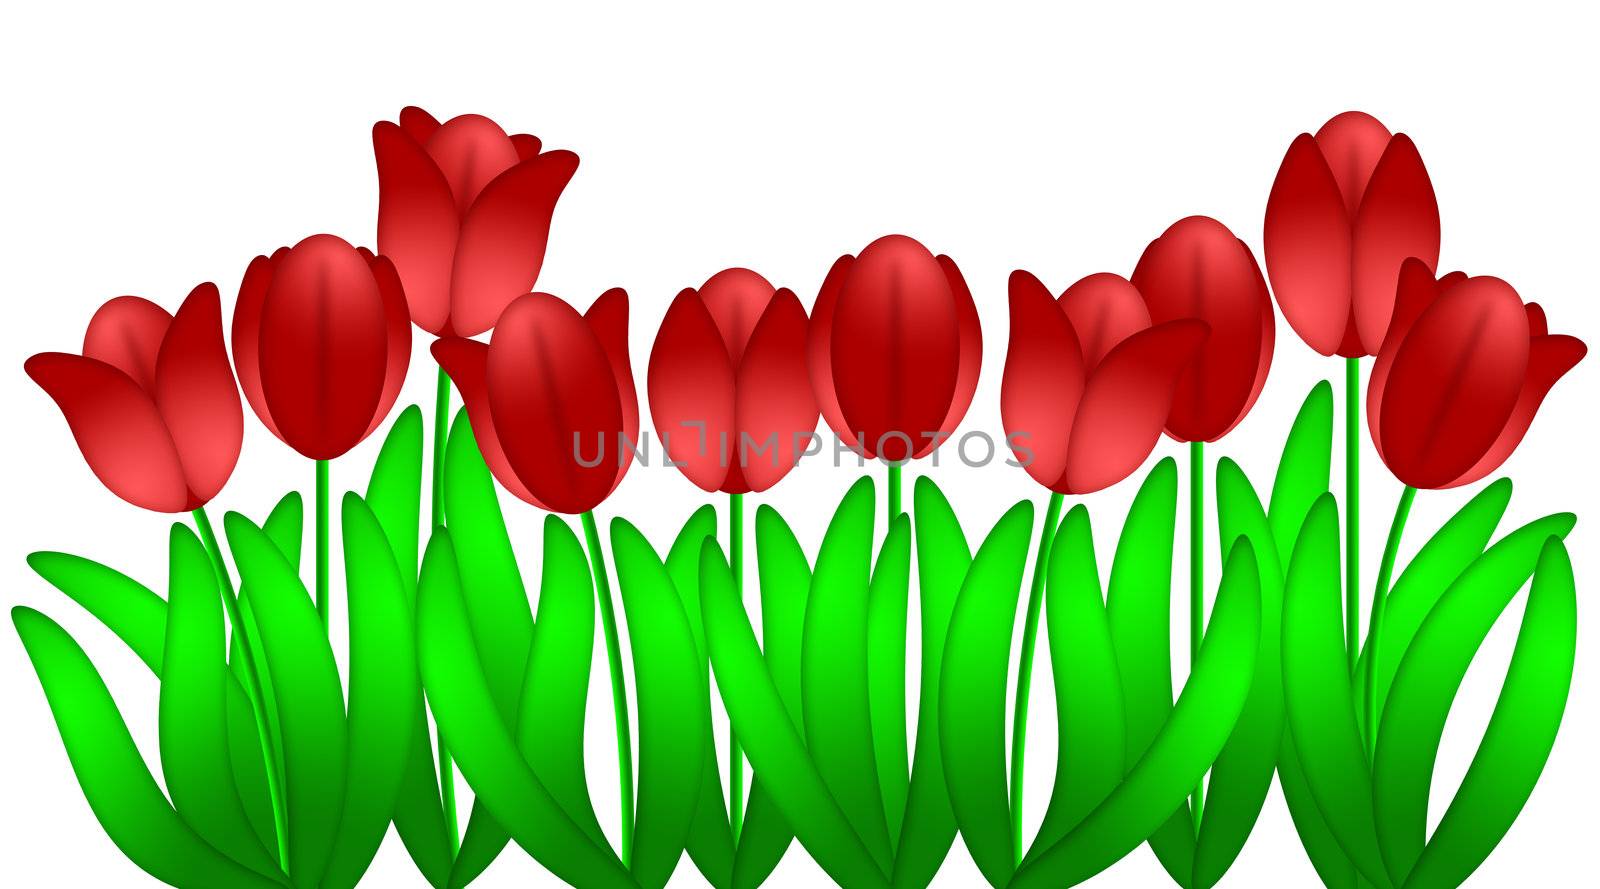 Row of Red Tulips Flowers Isolated on White Background by jpldesigns